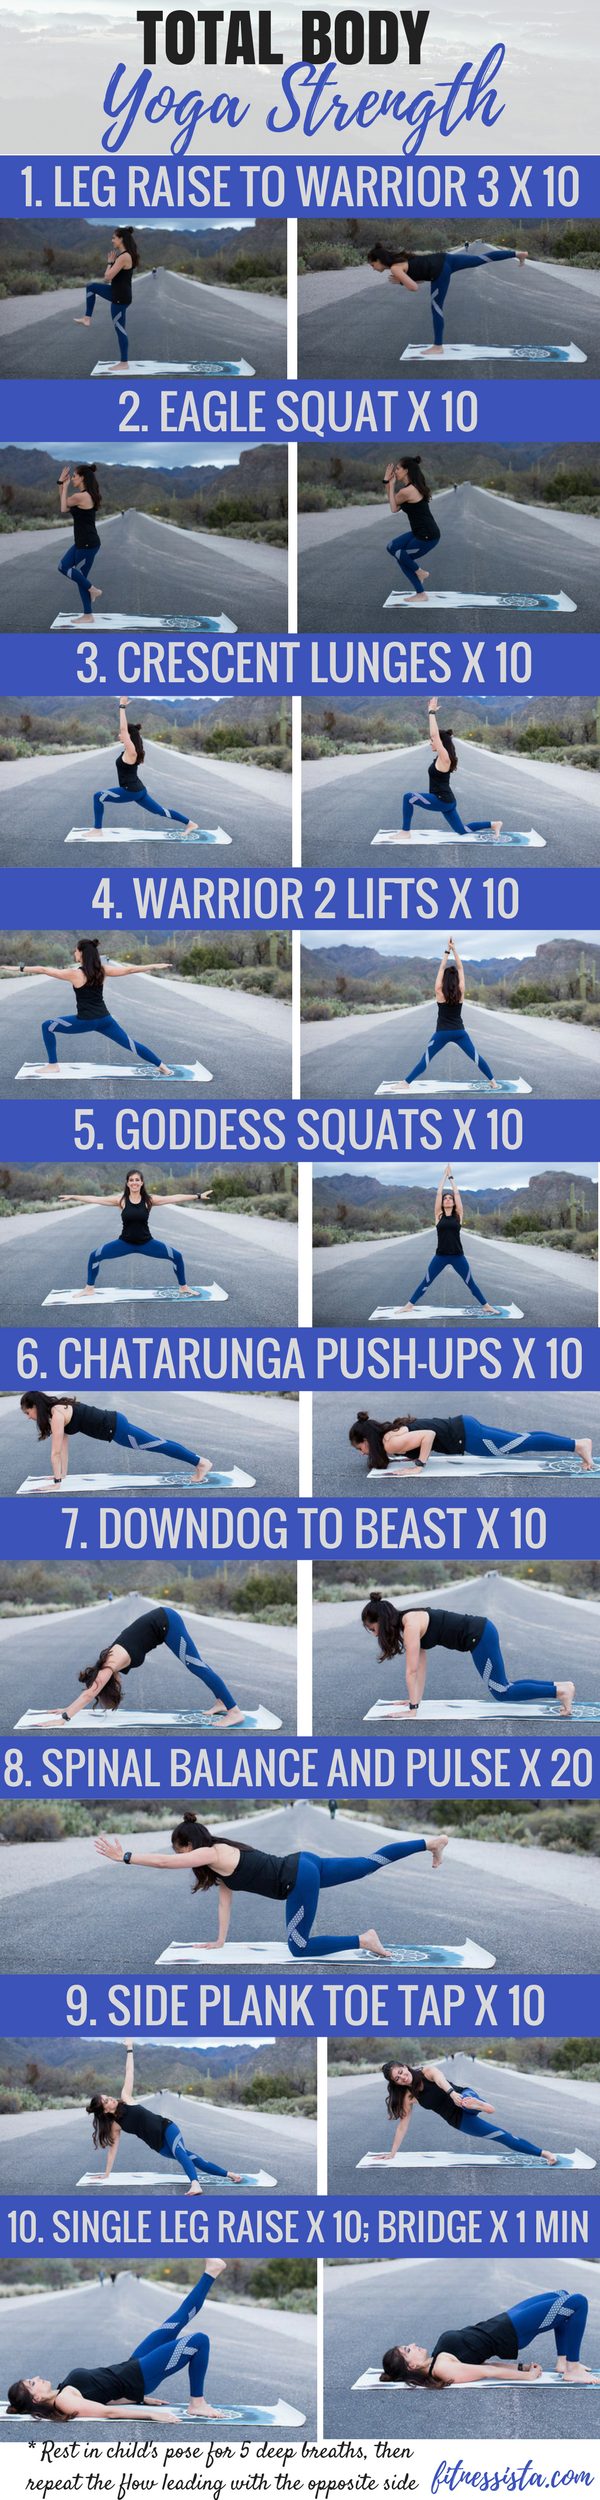 Total Body Yoga Strength Workout You Can Do At Home